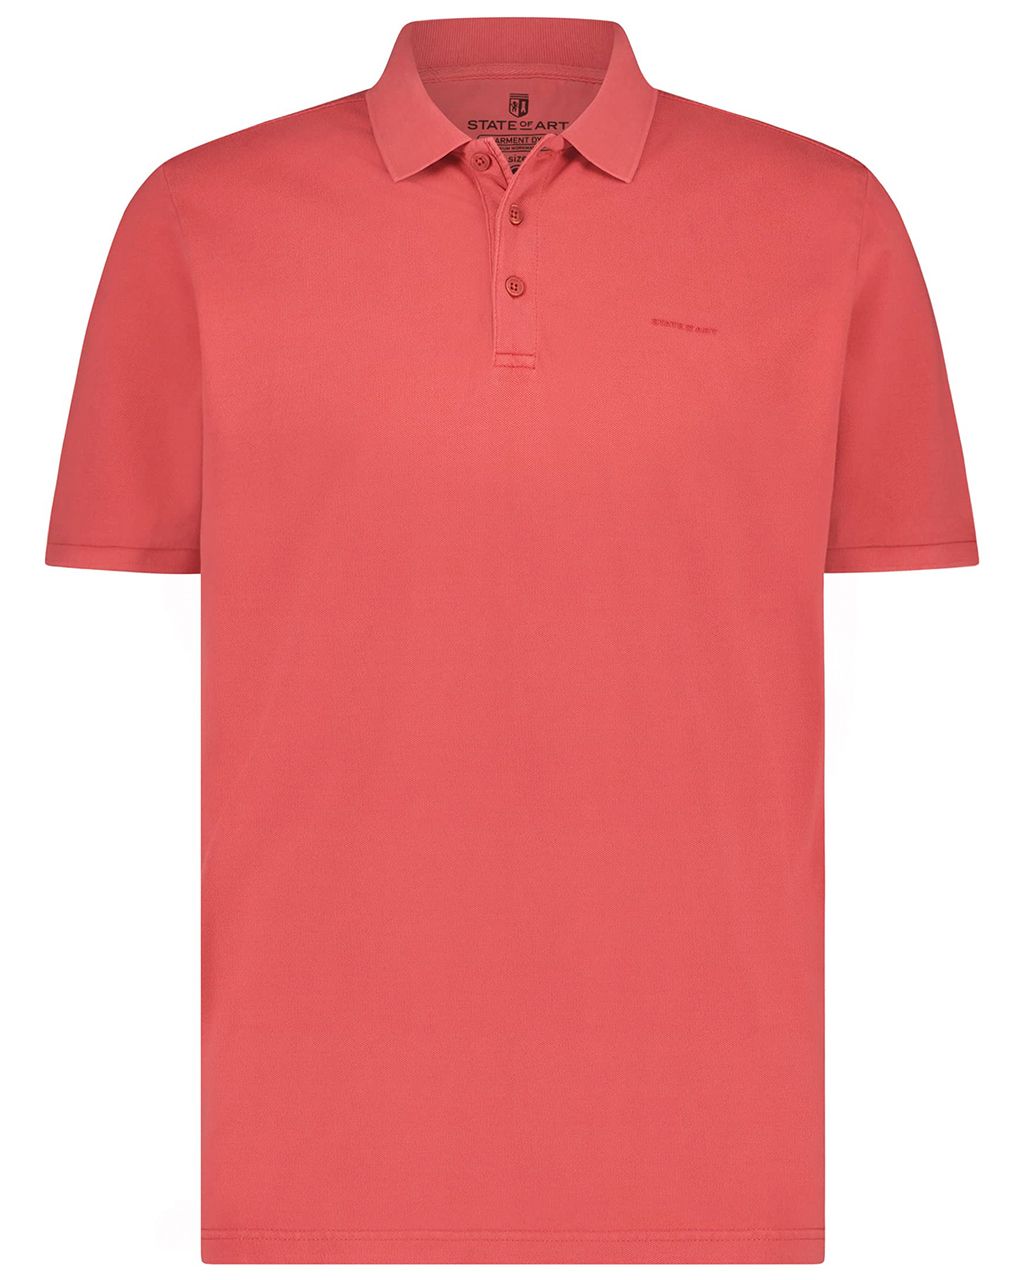 State of Art Polo KM Rood 075931-001-4XL